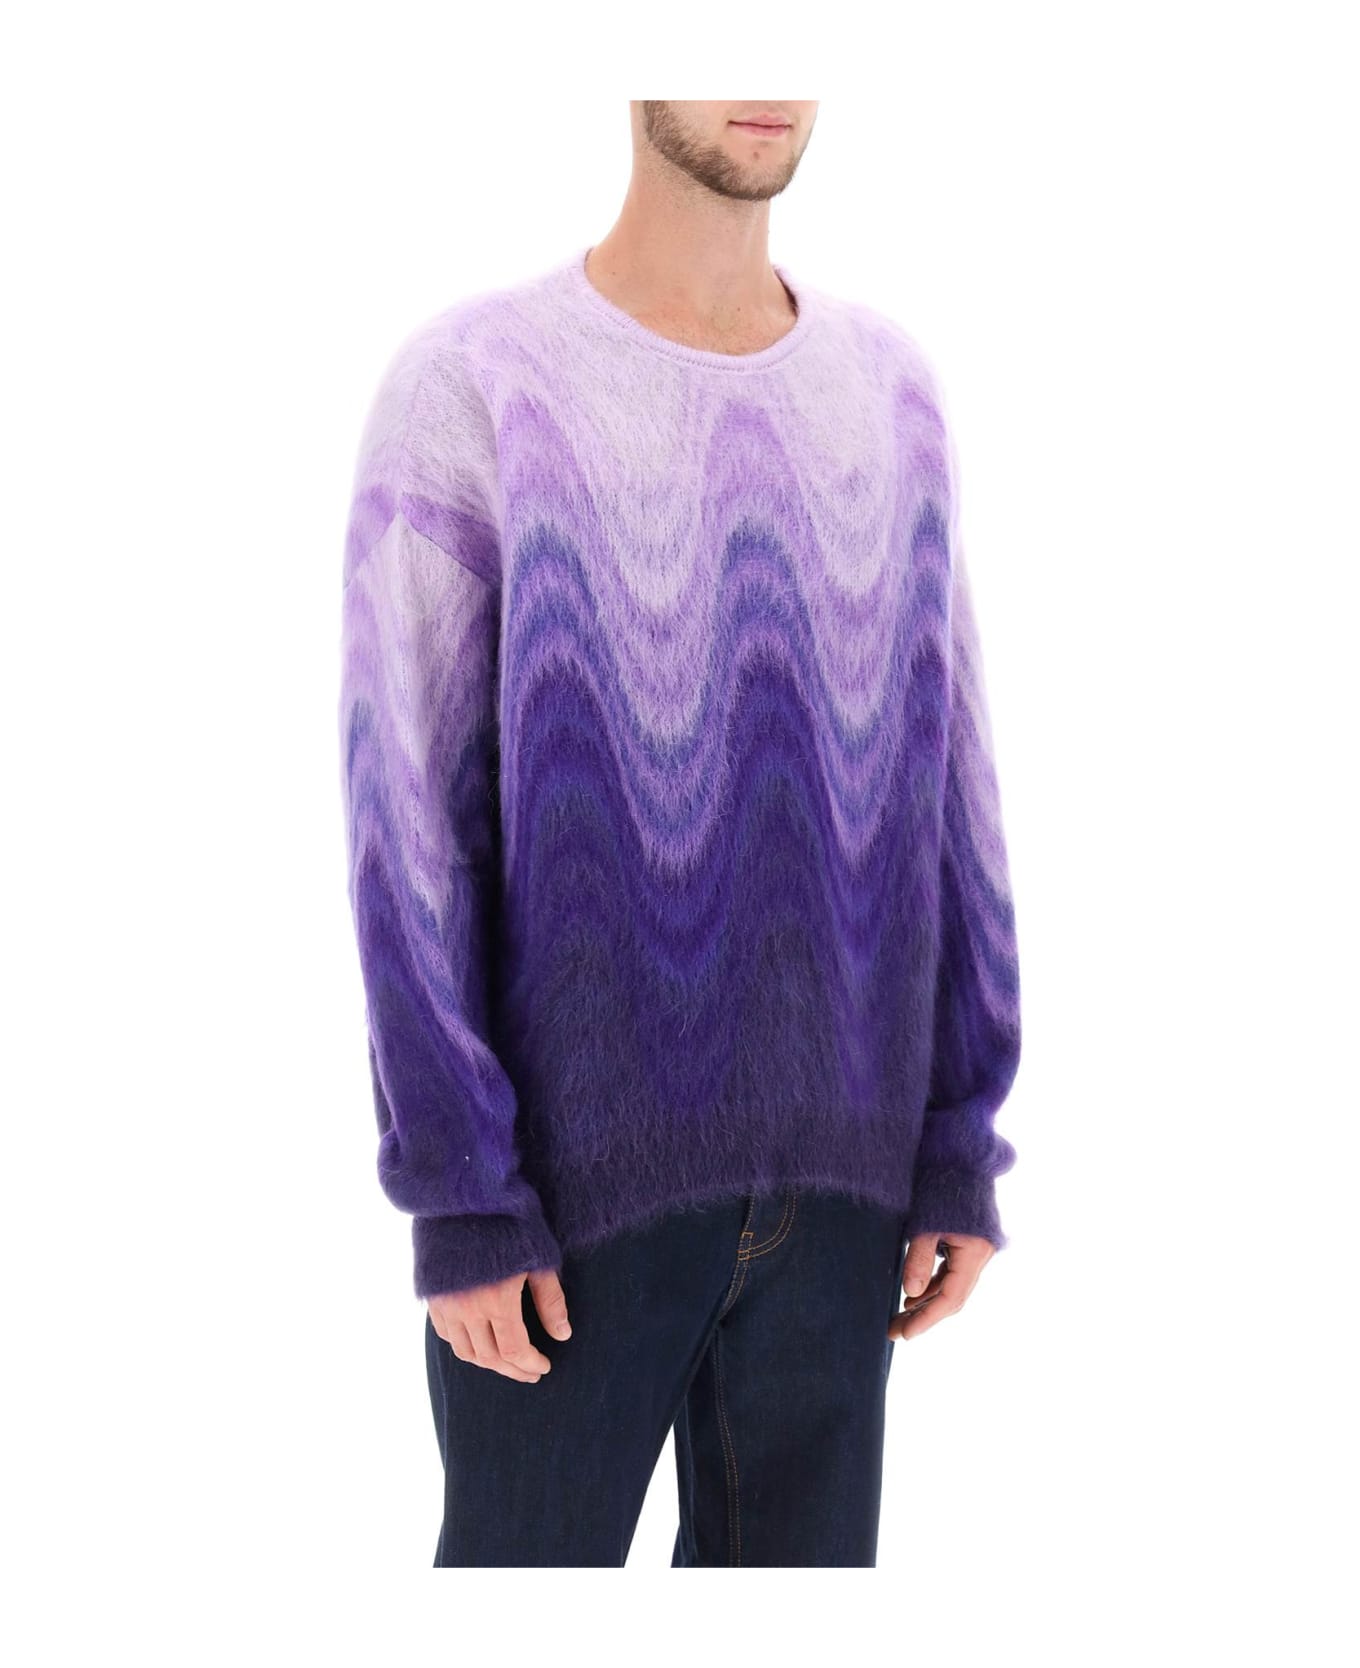 Etro Sweater In Gradient Brushed Mohair Wool - Purple ニットウェア